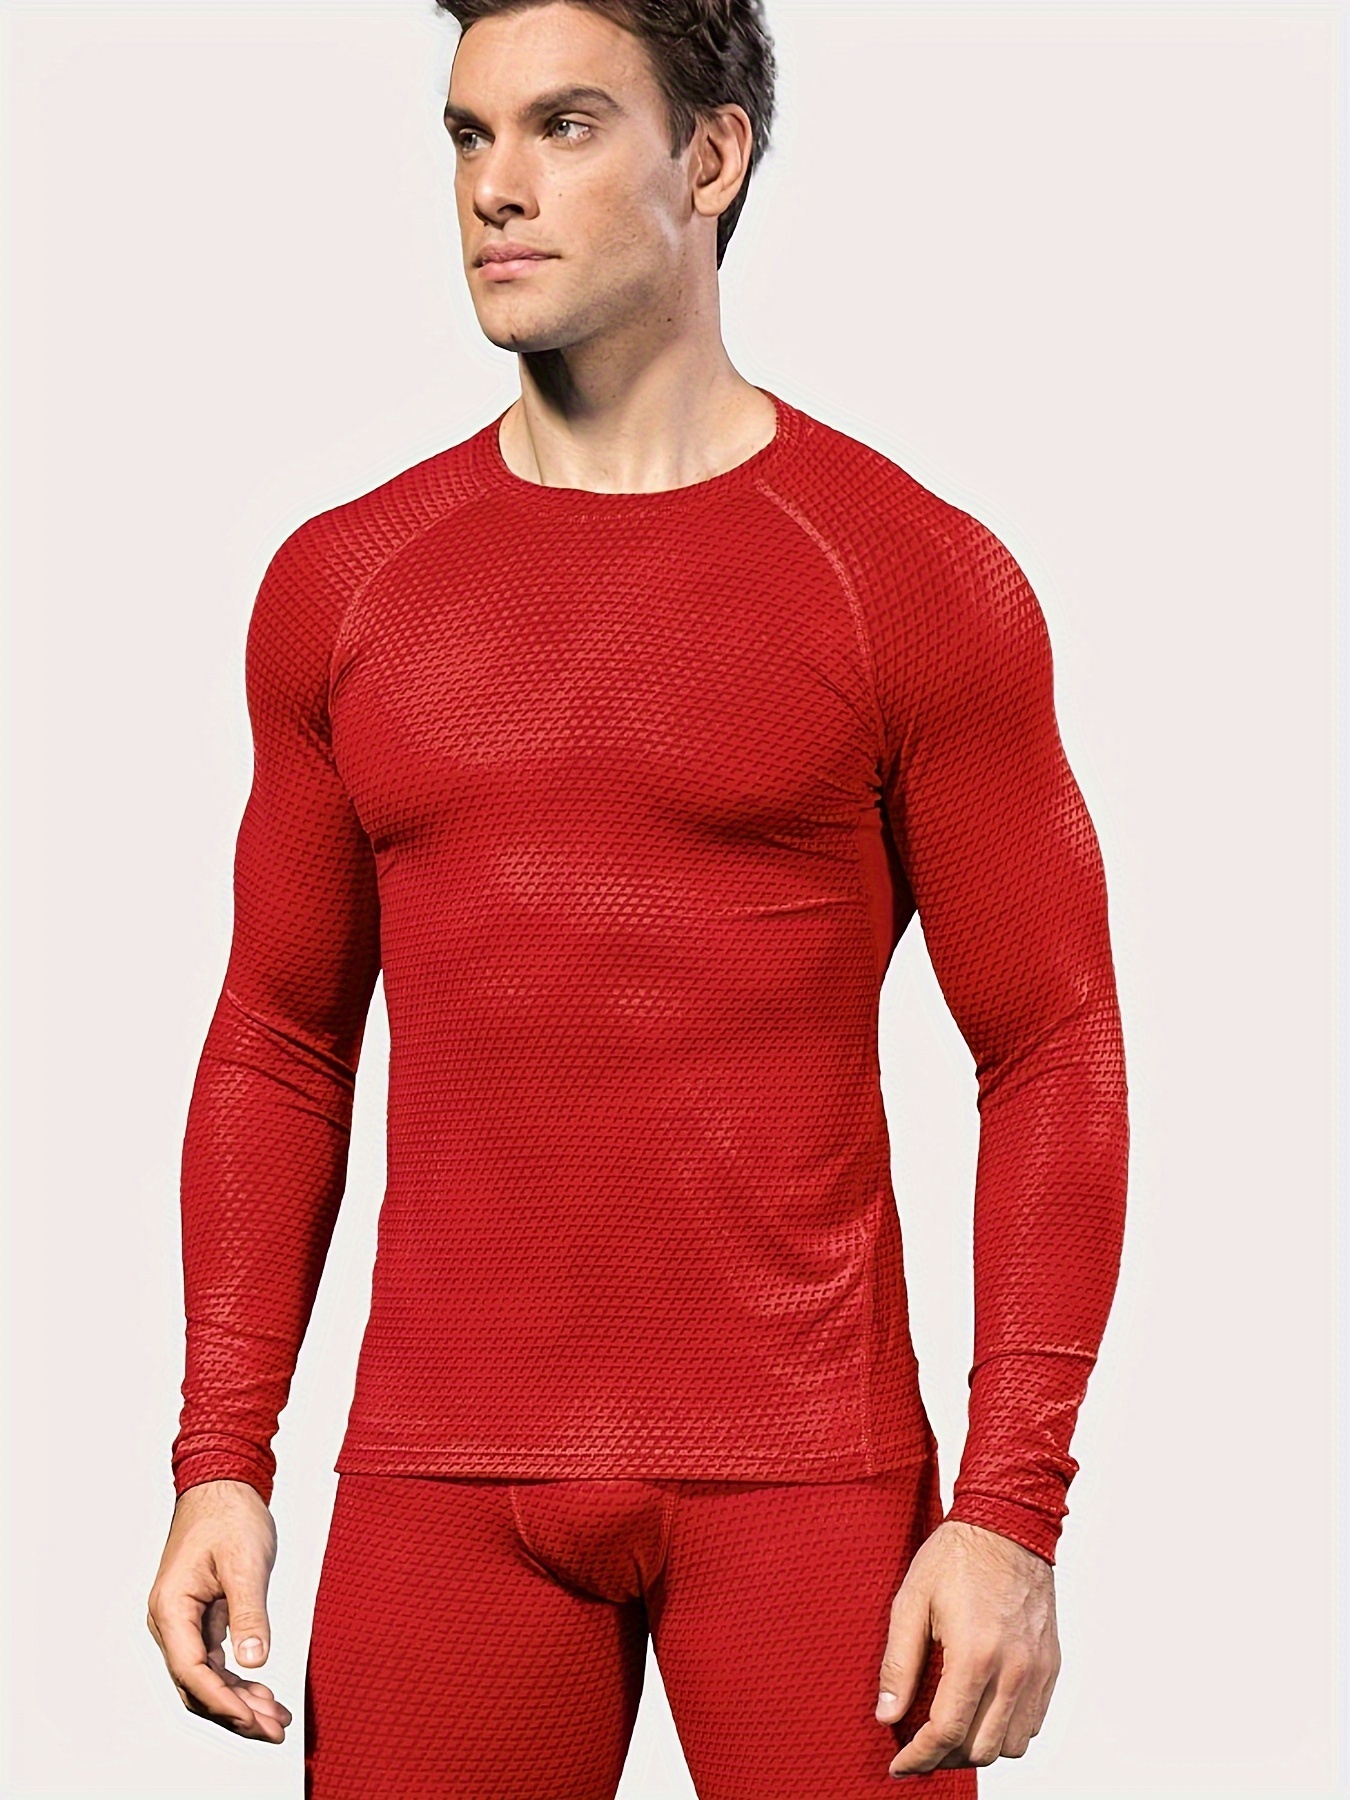 Niuer Mens Compression Shirt And Pant Set Crew Neck Base Layer Suit Long  Sleeve Tracksuit Tight Legging Outfits Quick Dry Red M 